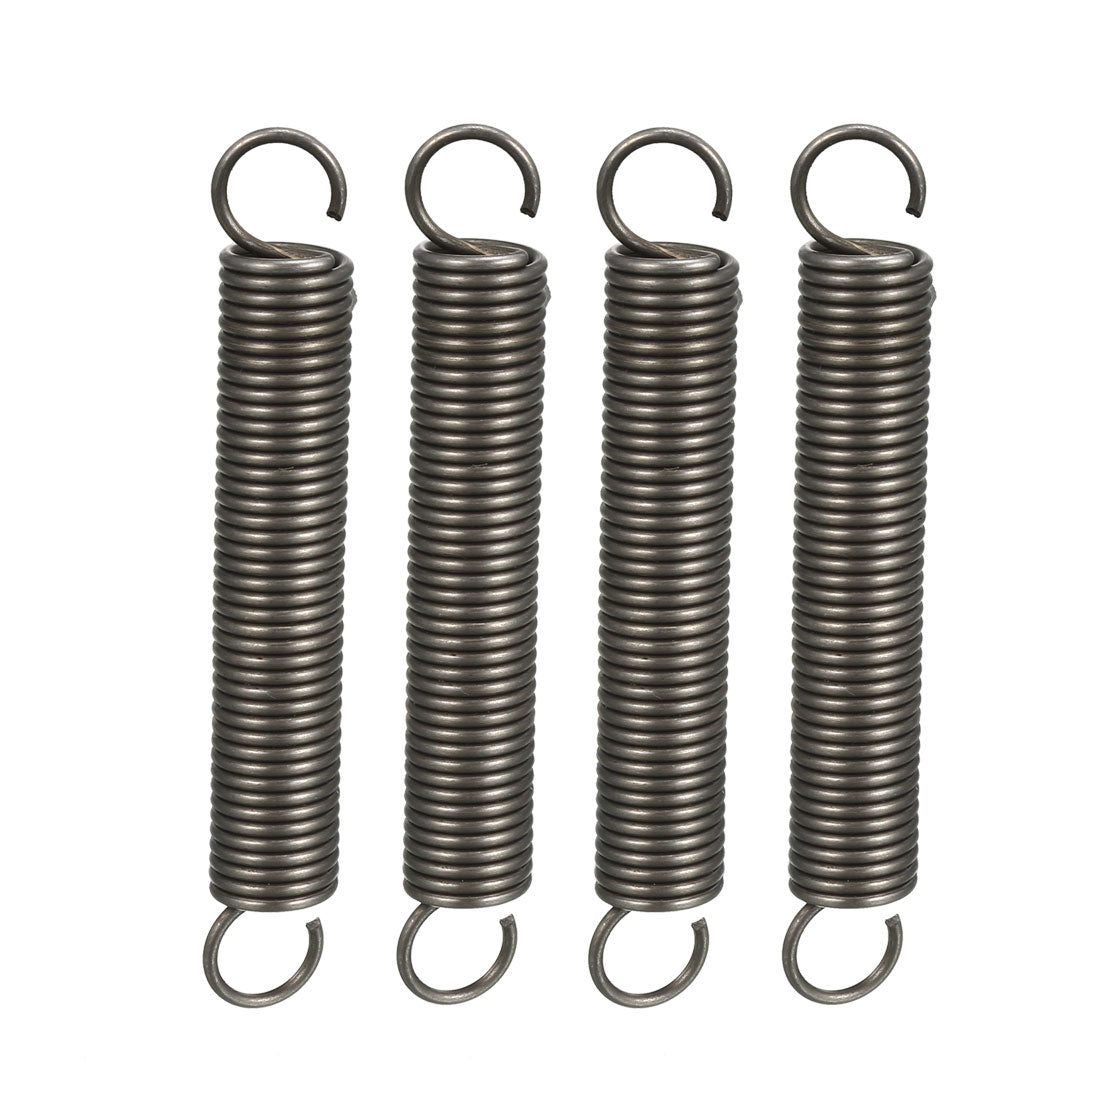 uxcell Uxcell Extended Tension Spring Wire Diameter 0.047", OD 0.39", Free Length 2.76" 4pcs